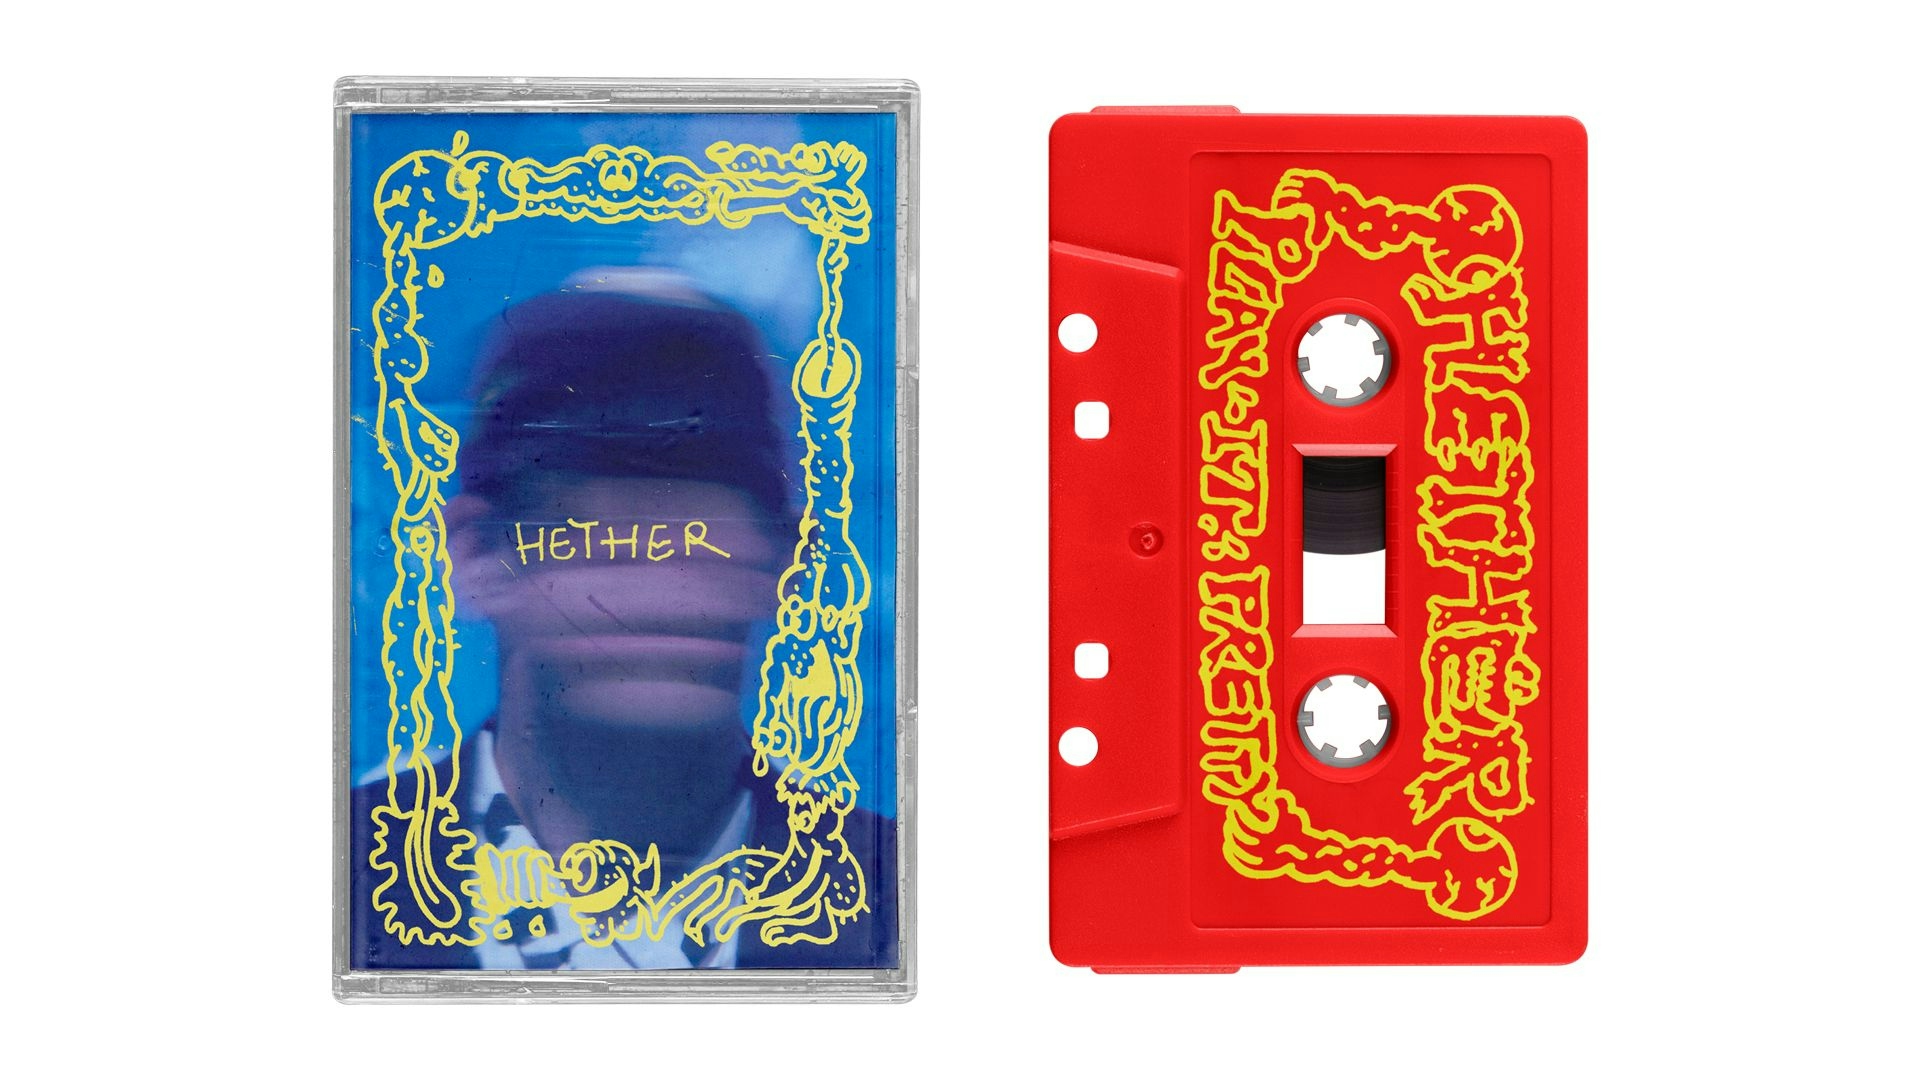 Hether red cassette tape and packaging